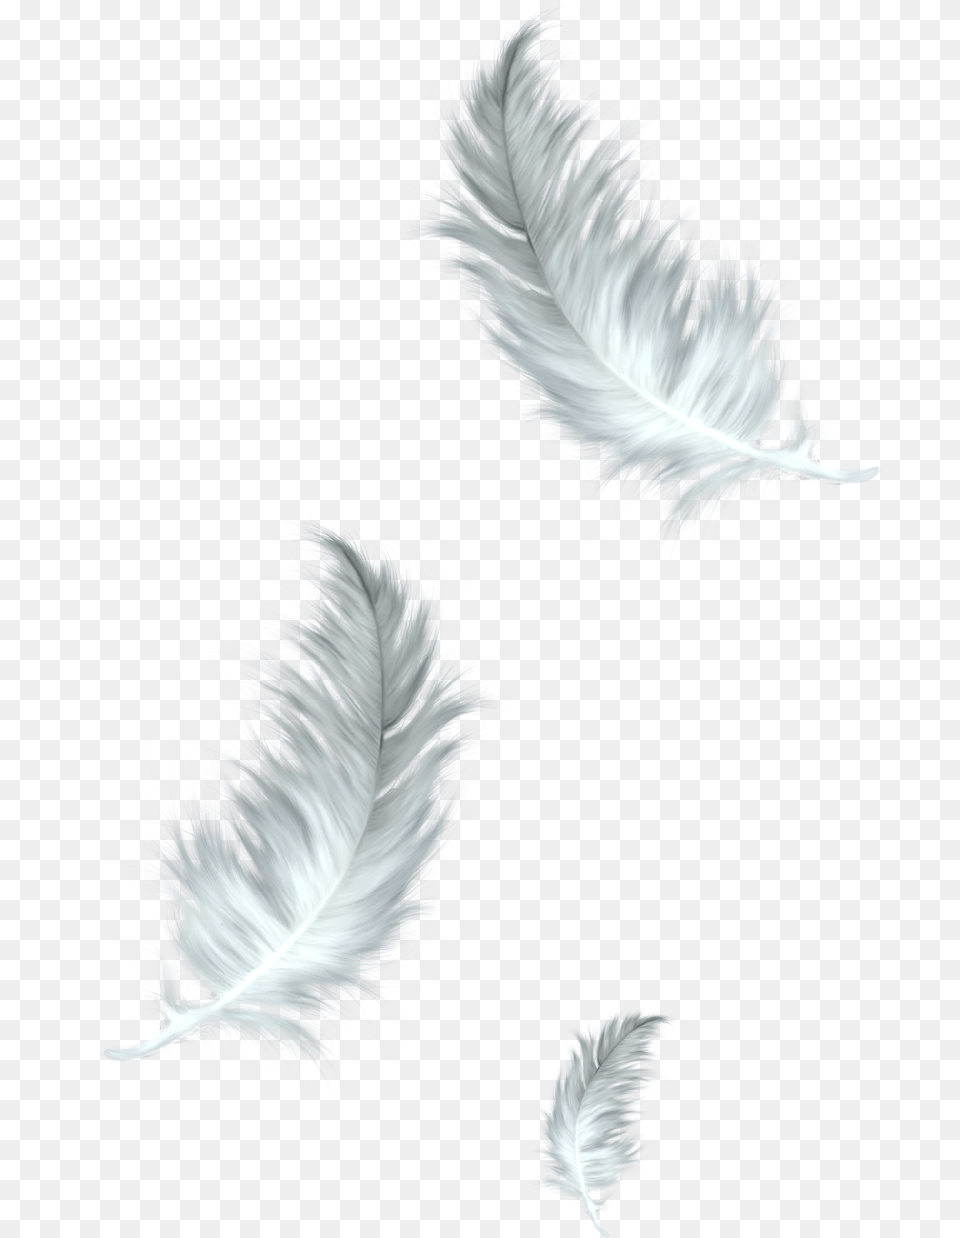 The Floating Feather Bird Clip Art Feathers Download Feathers, Accessories, Pattern, Feather Boa Png